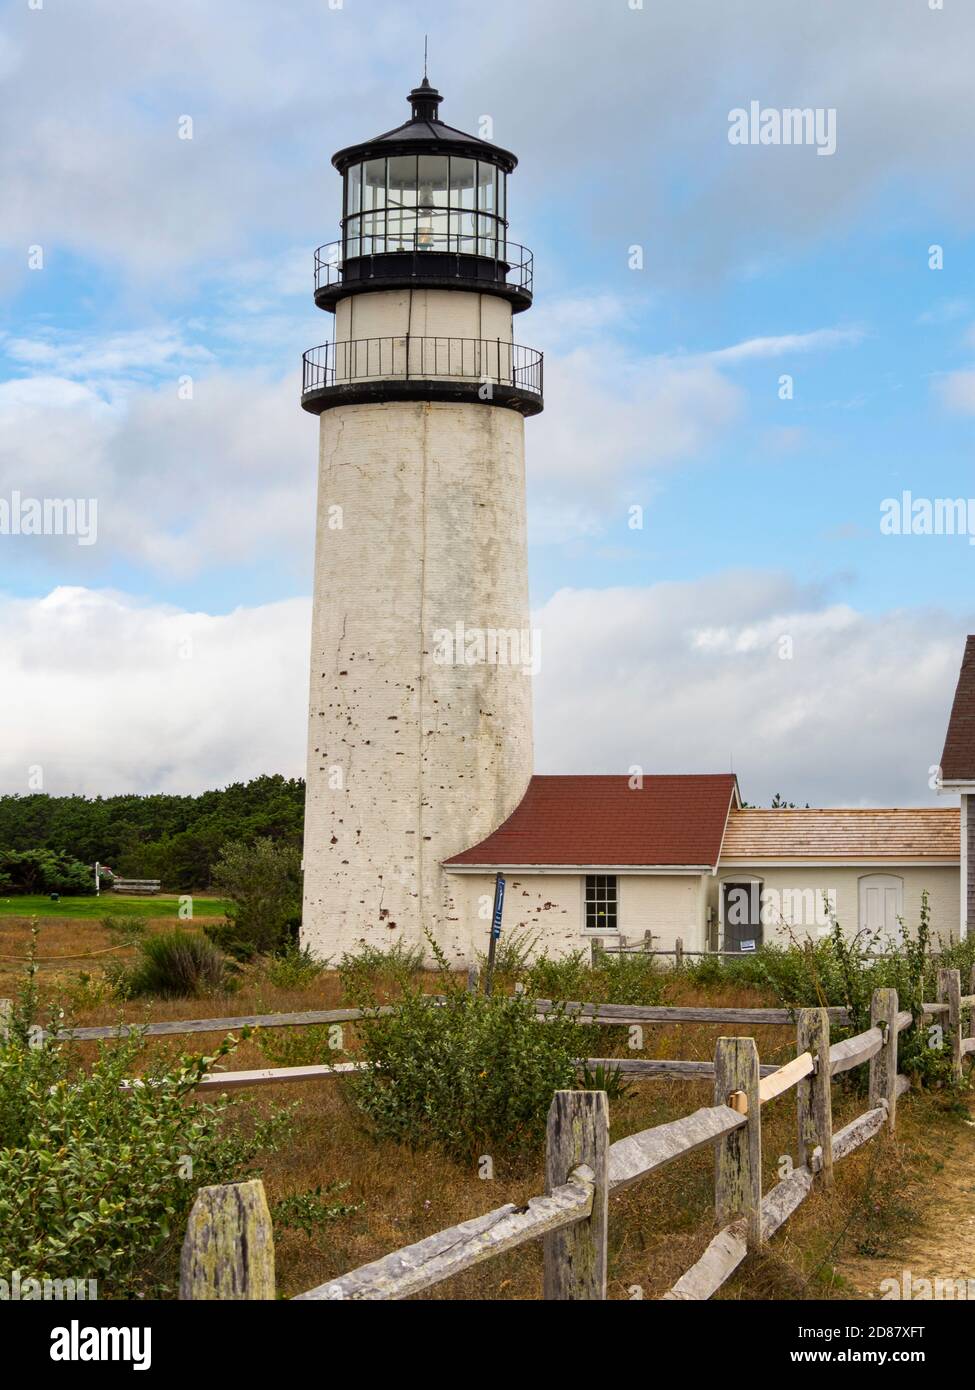 Cape Cod Lighthouse aka Highland Light Station. The oldest light house on Cape Cod, in North Truro, Massachusetts, USA, labor day weekend. Stock Photo